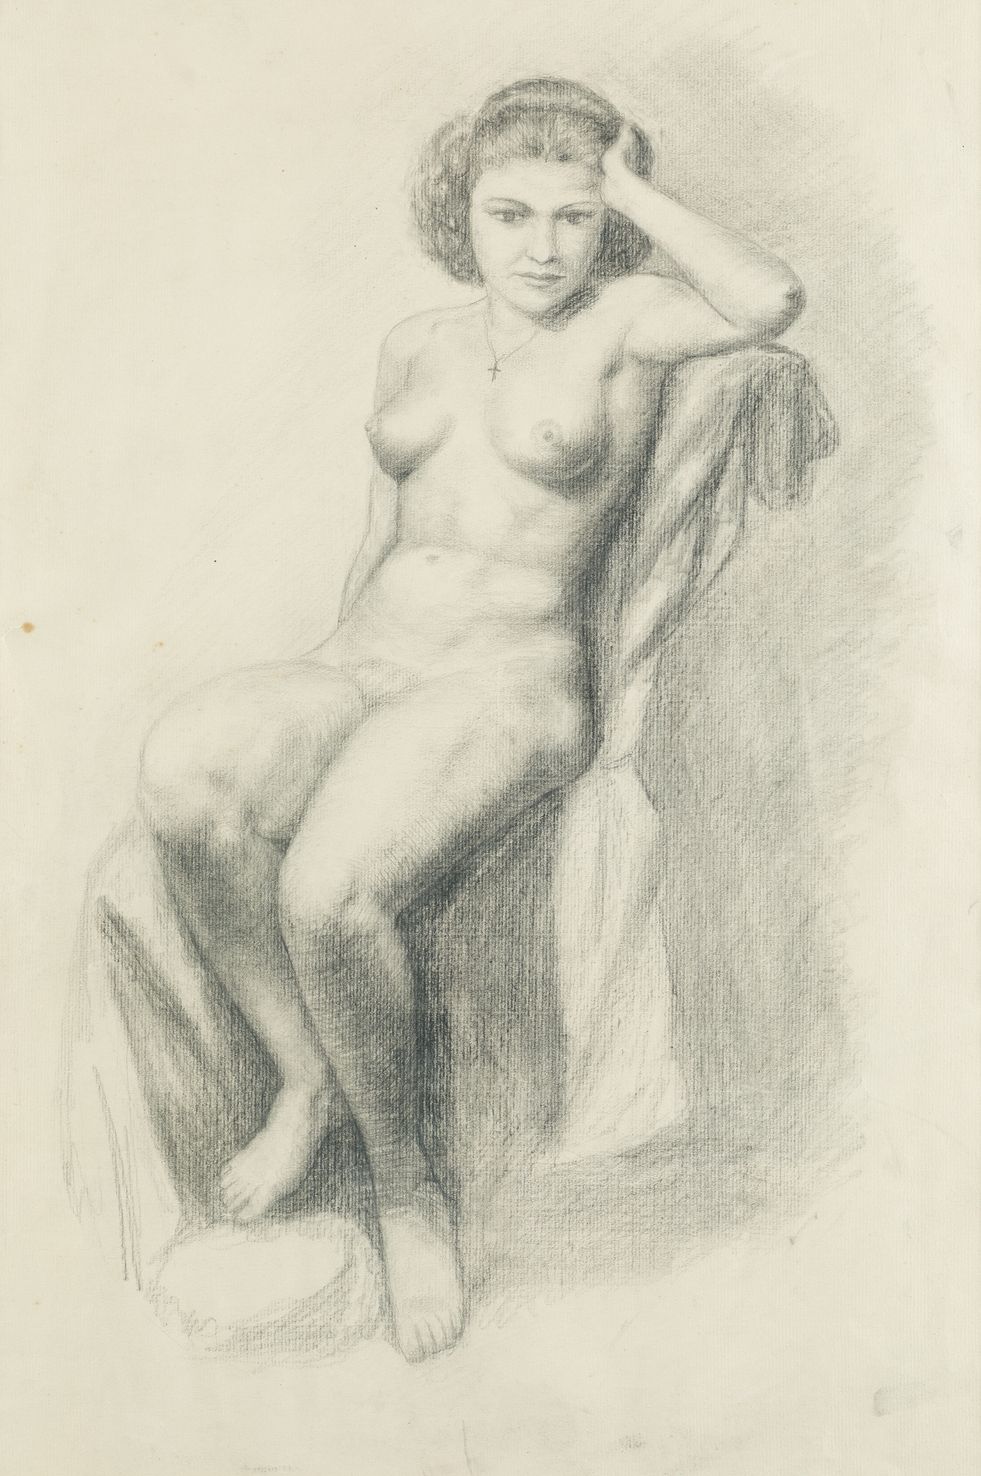 ANONYMOUS (Earlies 20th Century) "Female nude" . Graphite on paper.59 x 39 cm